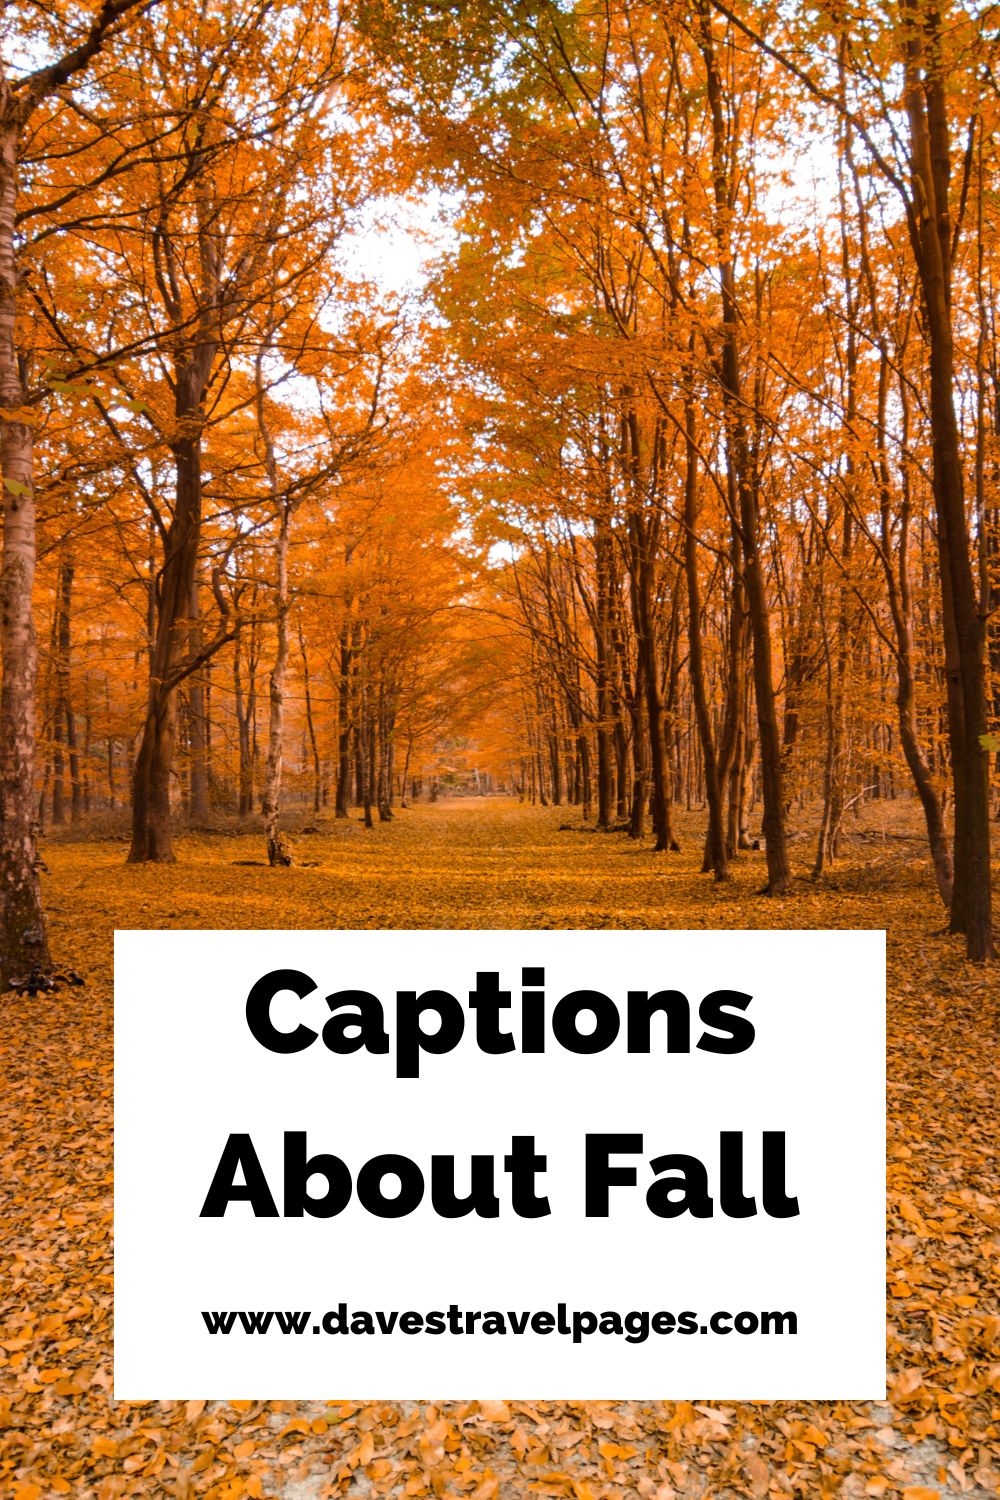 Captions About Fall